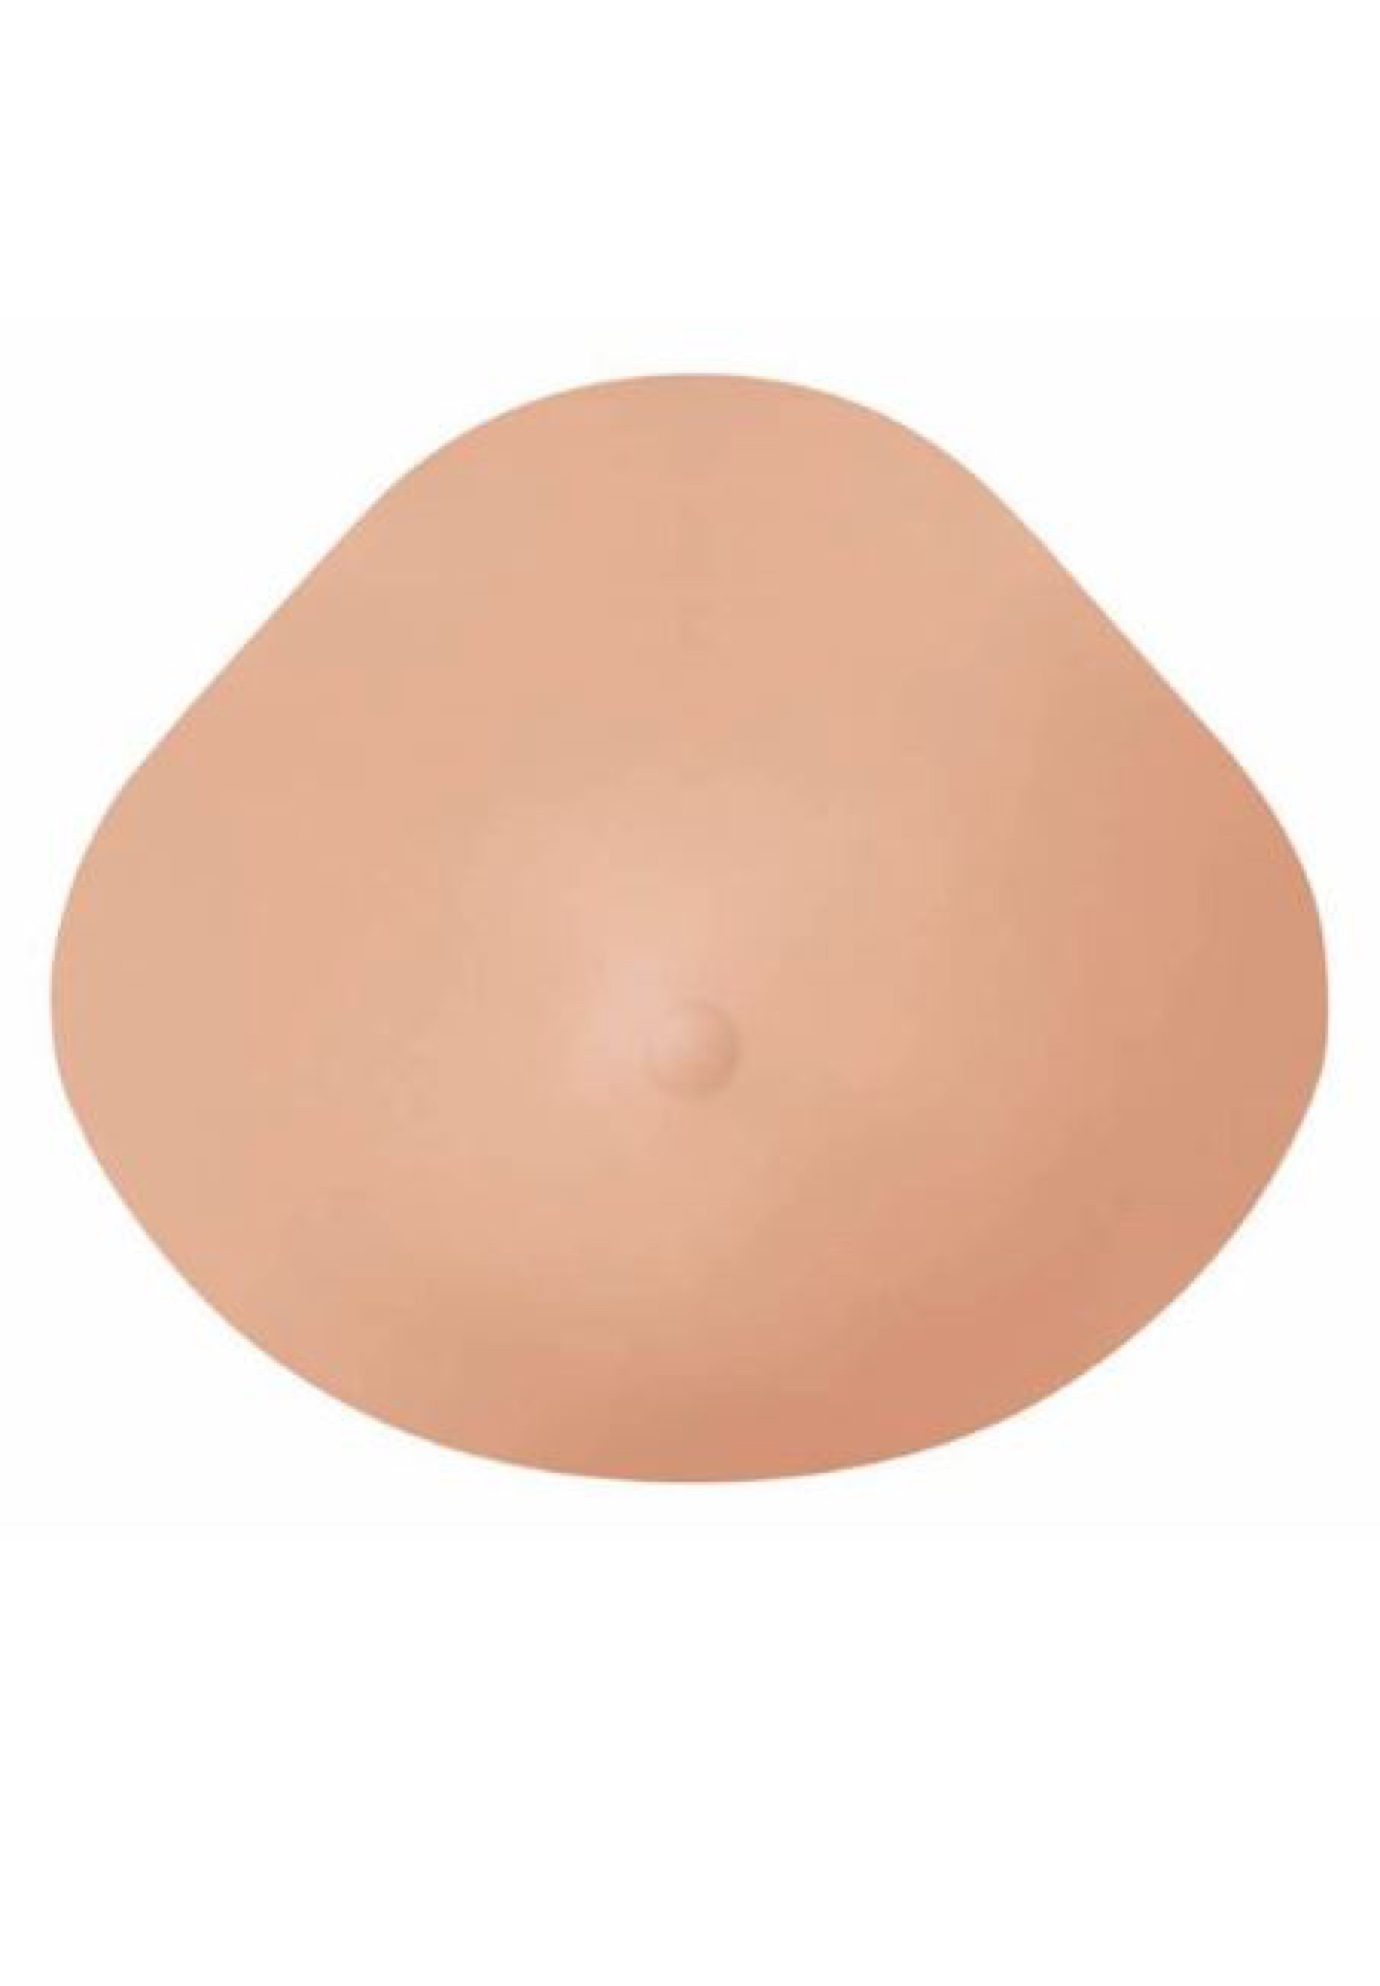 What Is Breast Prosthesis